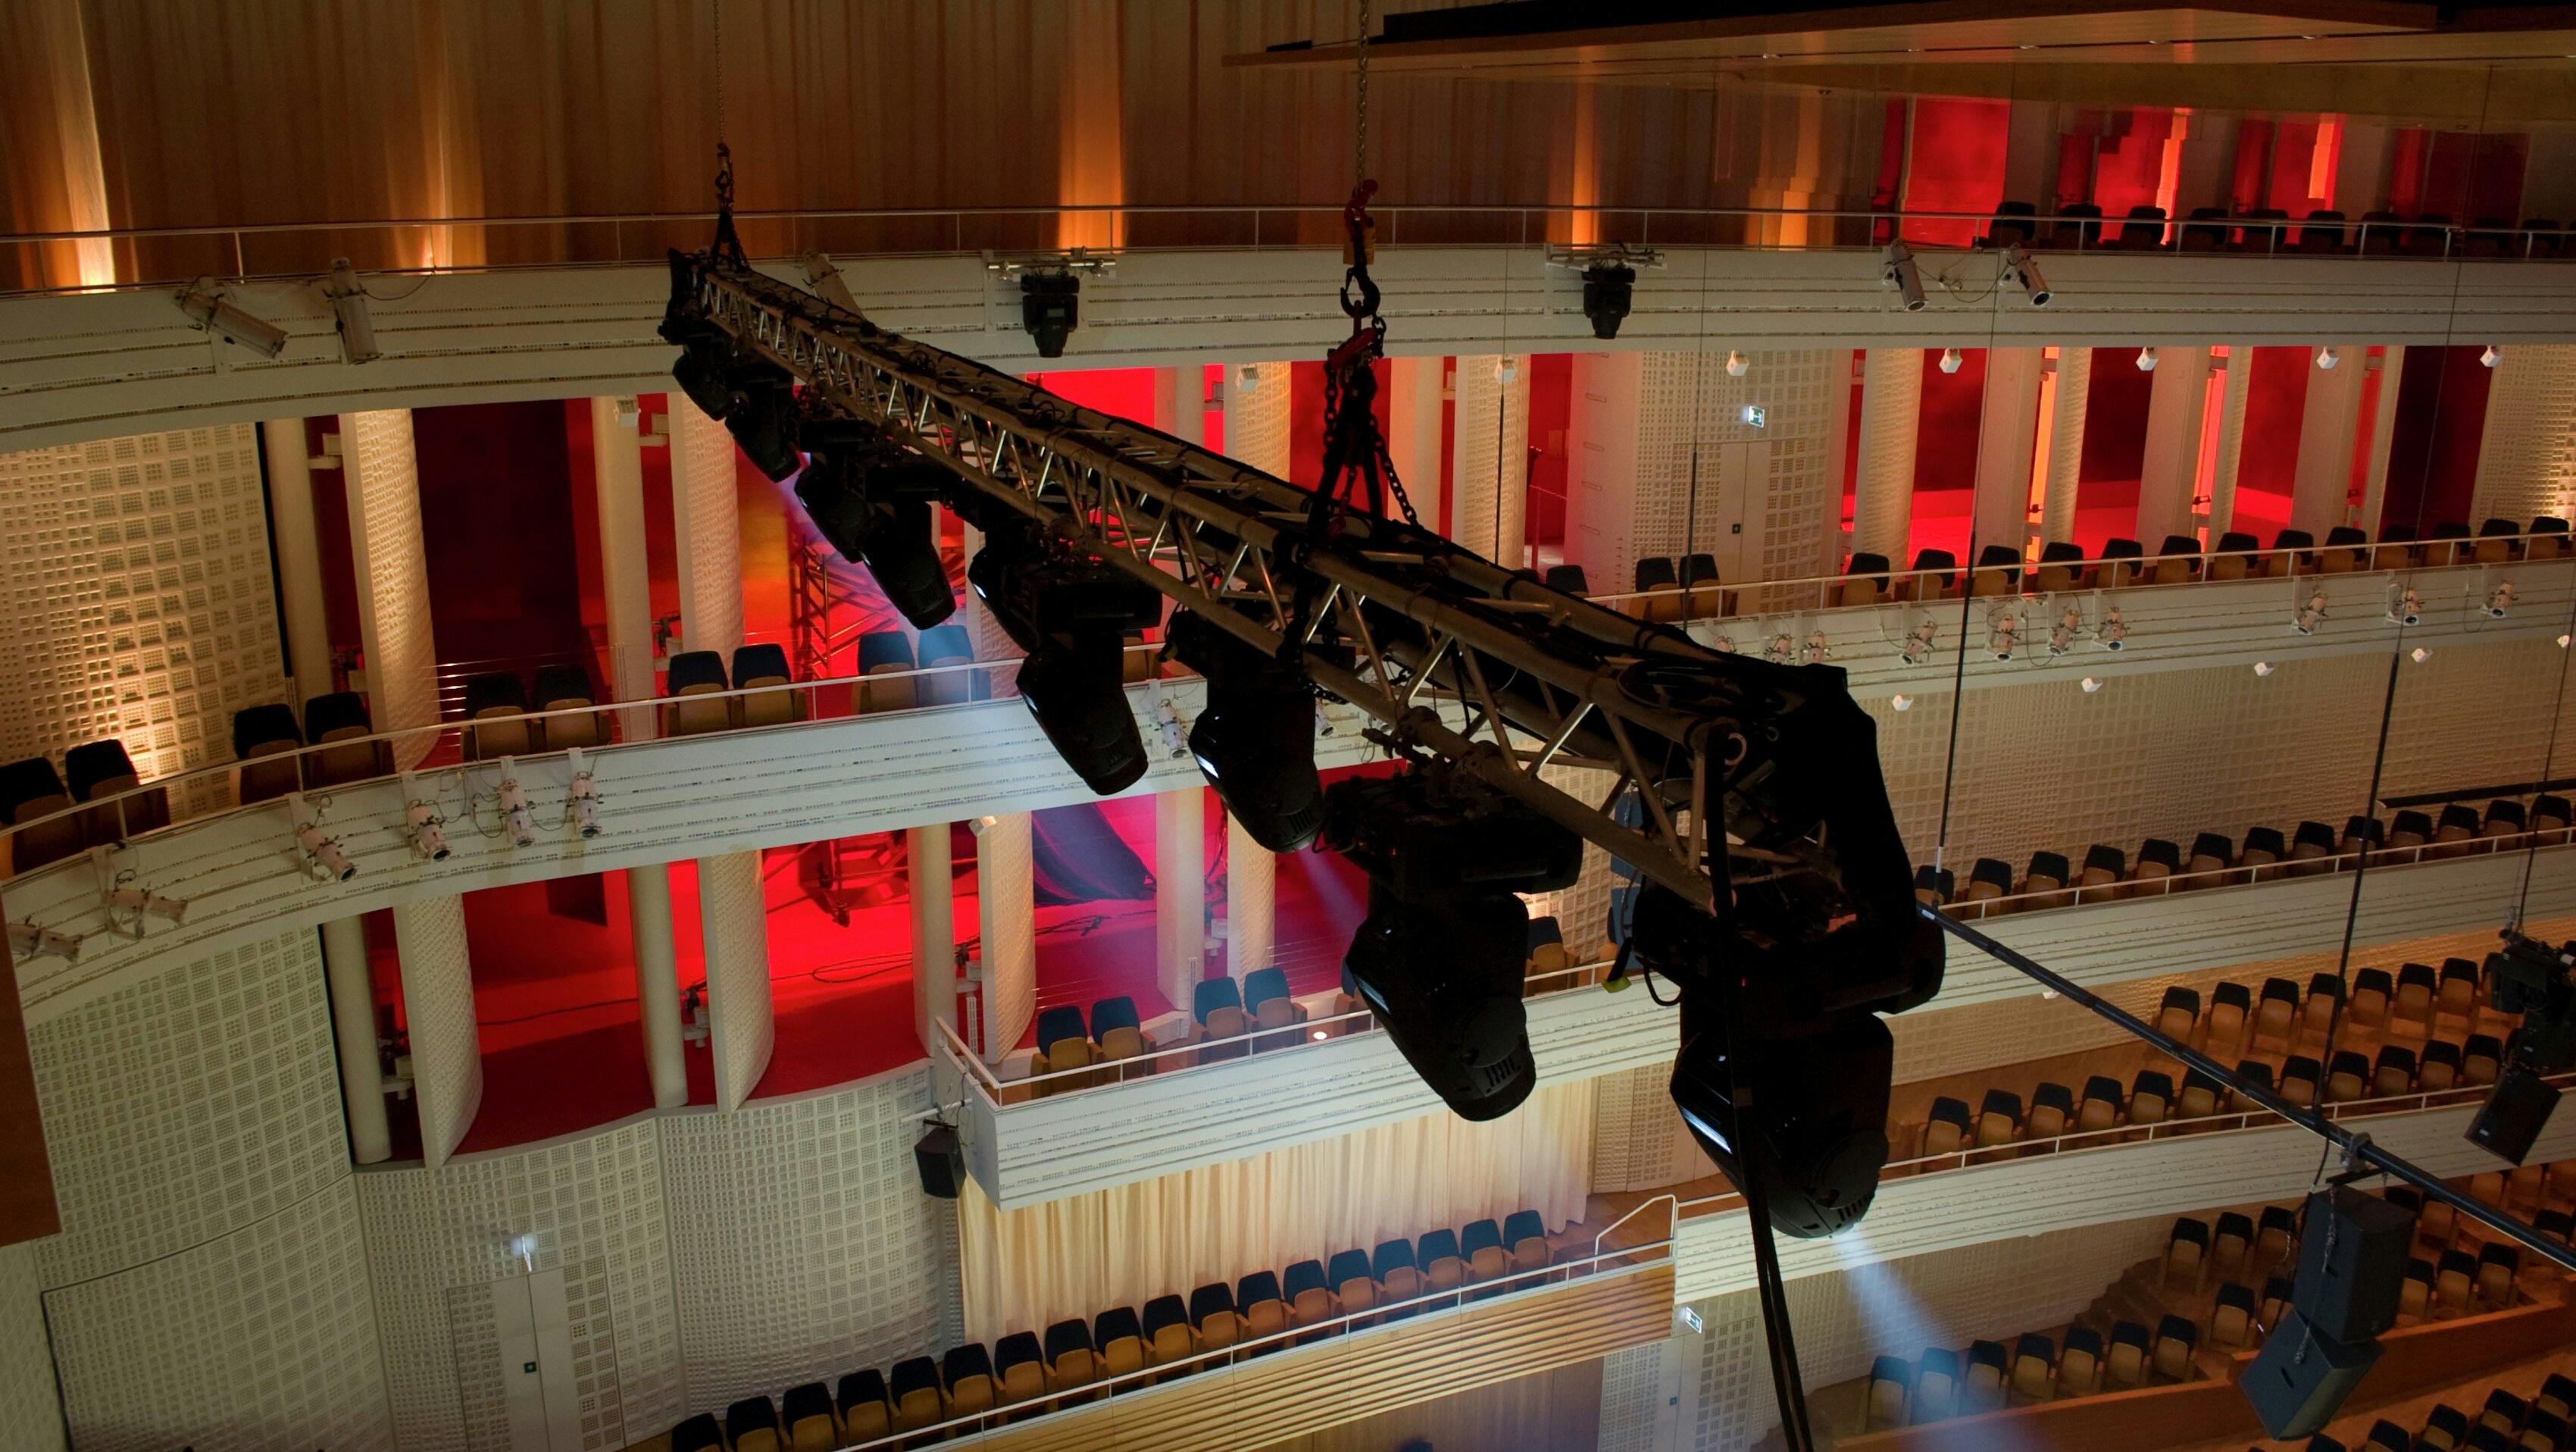 The Event Technology stages beautiful lighting moods in the Concert Hall of the KKL Luzern